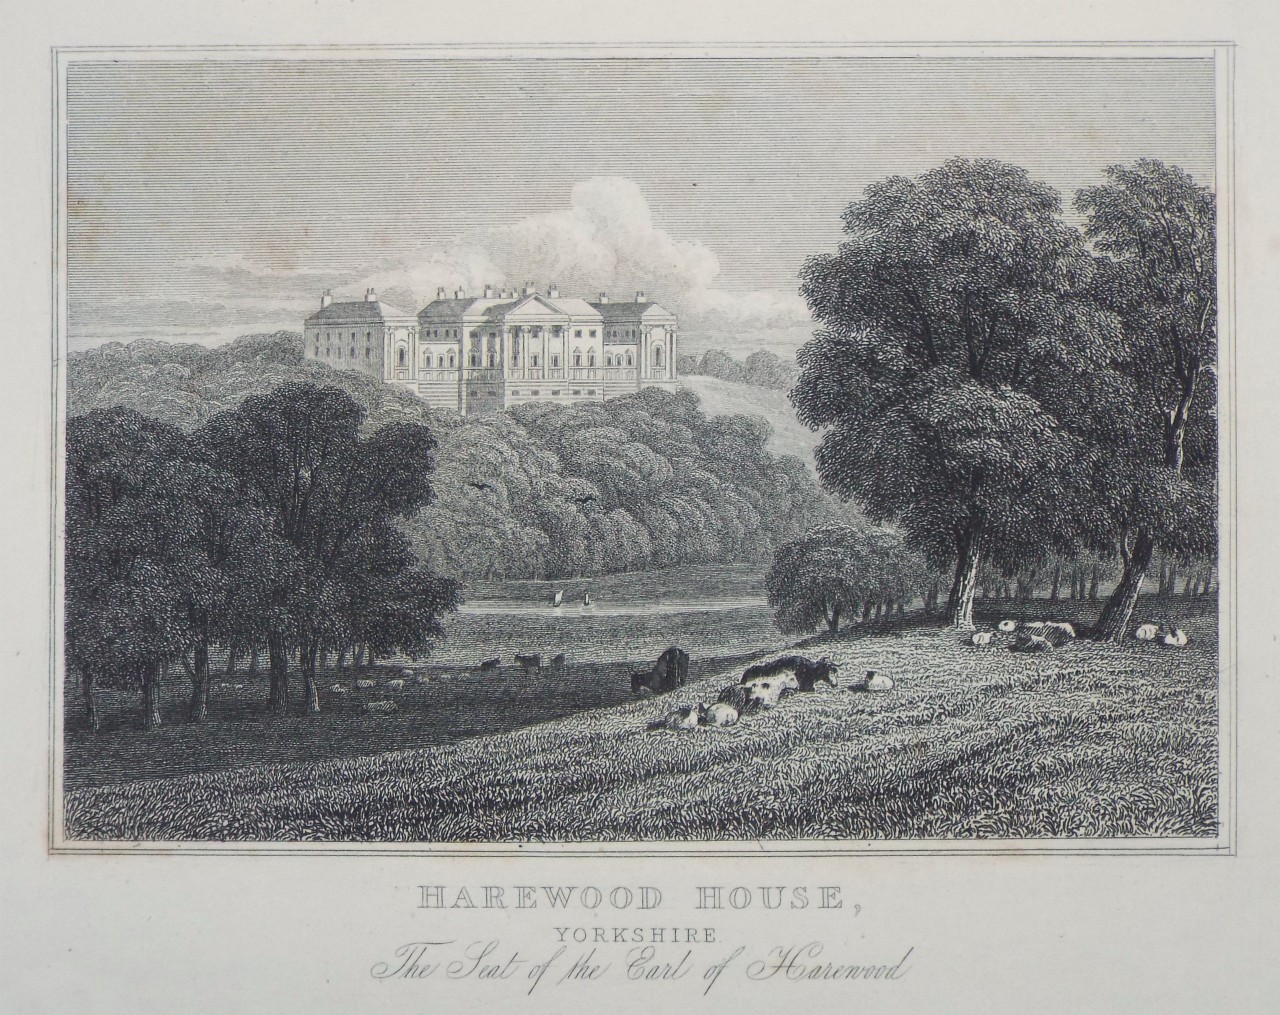 Print - Harewood House, Yorkshire. The Seat of the Earl of Harewood. - 